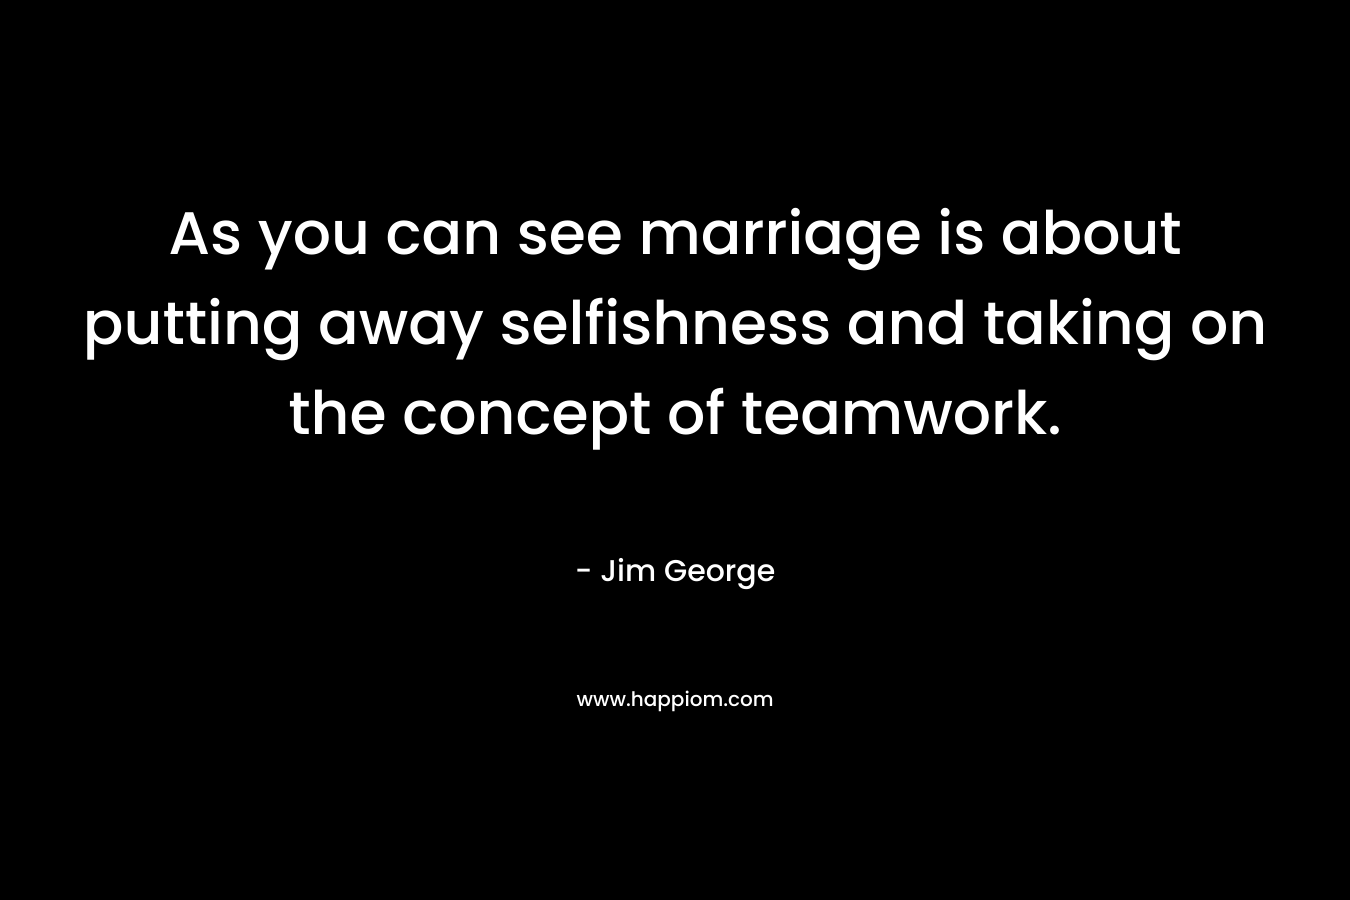 As you can see marriage is about putting away selfishness and taking on the concept of teamwork. – Jim George